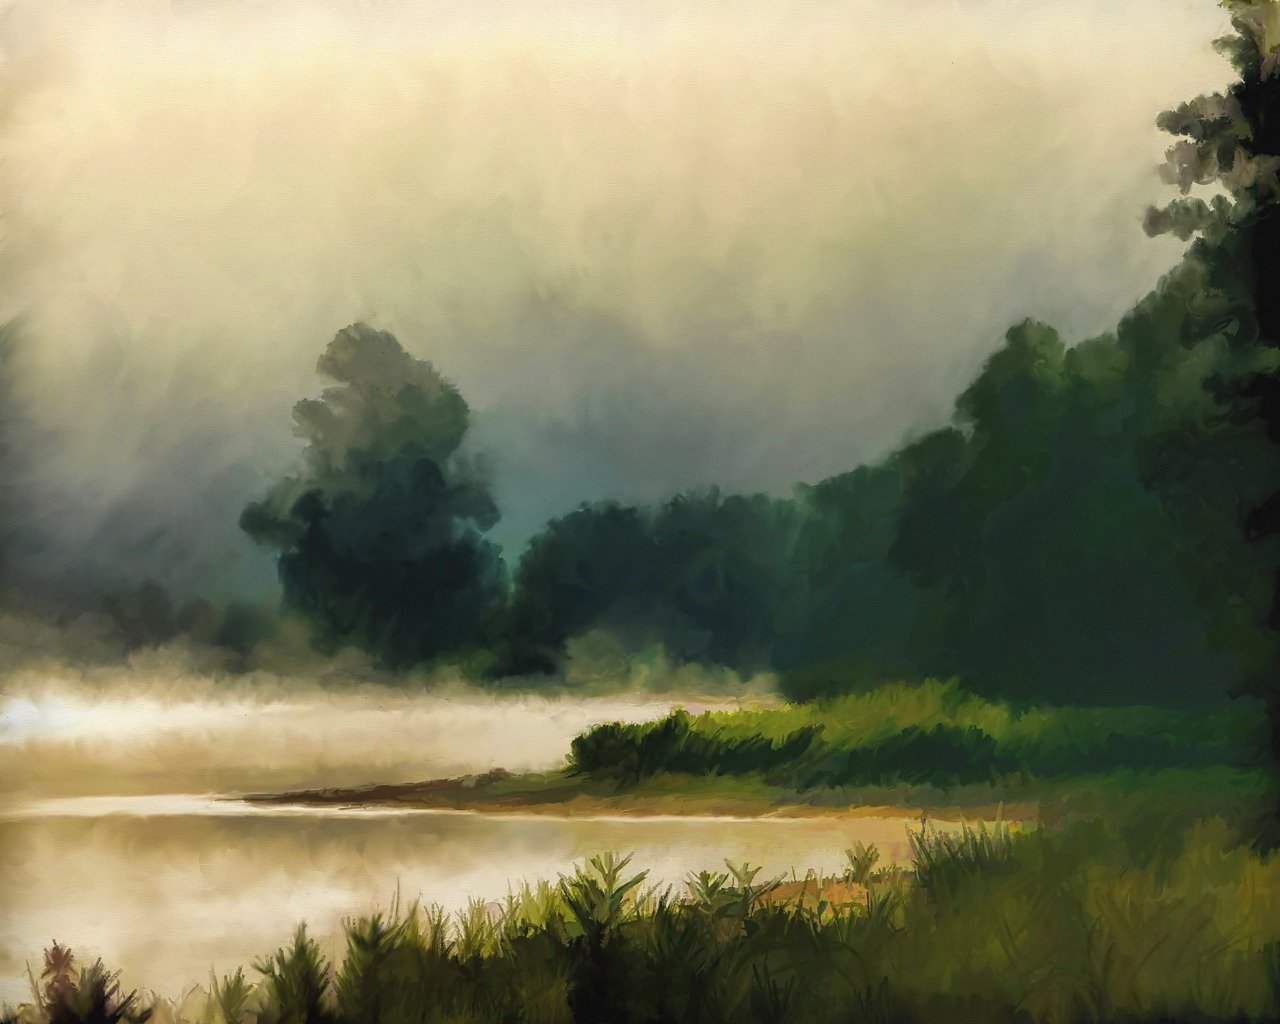 a painting of a lake surrounded by trees, a digital painting, inspired by Thomas Moran, deviantart contest winner, tonalism, sand mists, savana background, wide establishing shot, the morning river